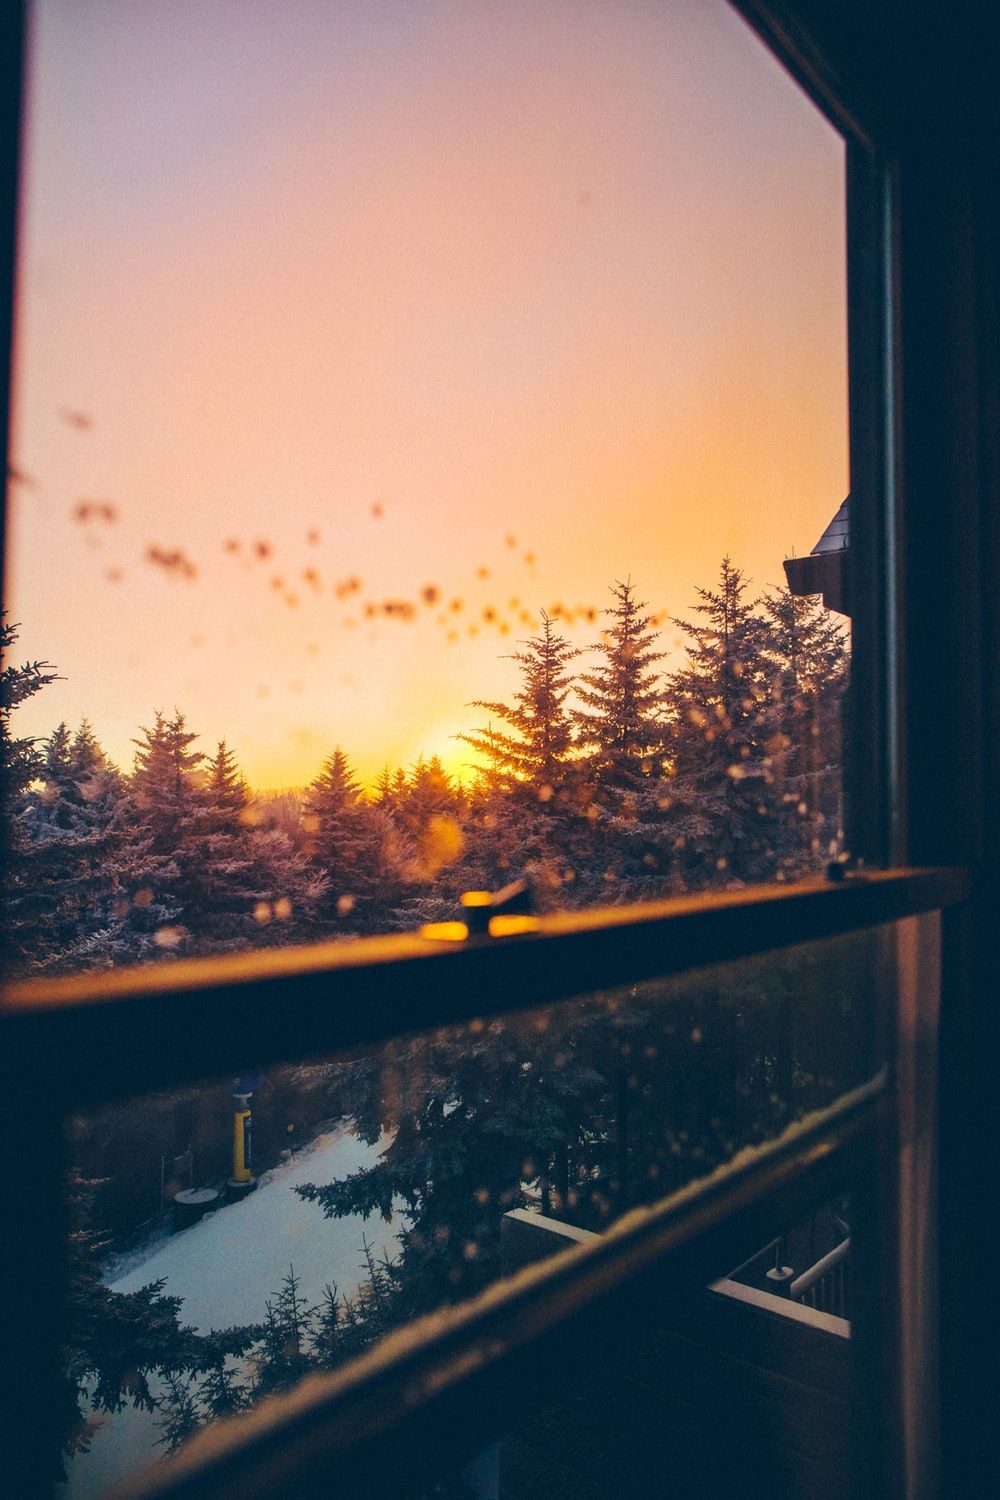 A beautiful sunset over a snowy forest, as seen through a window. - Warm, cozy